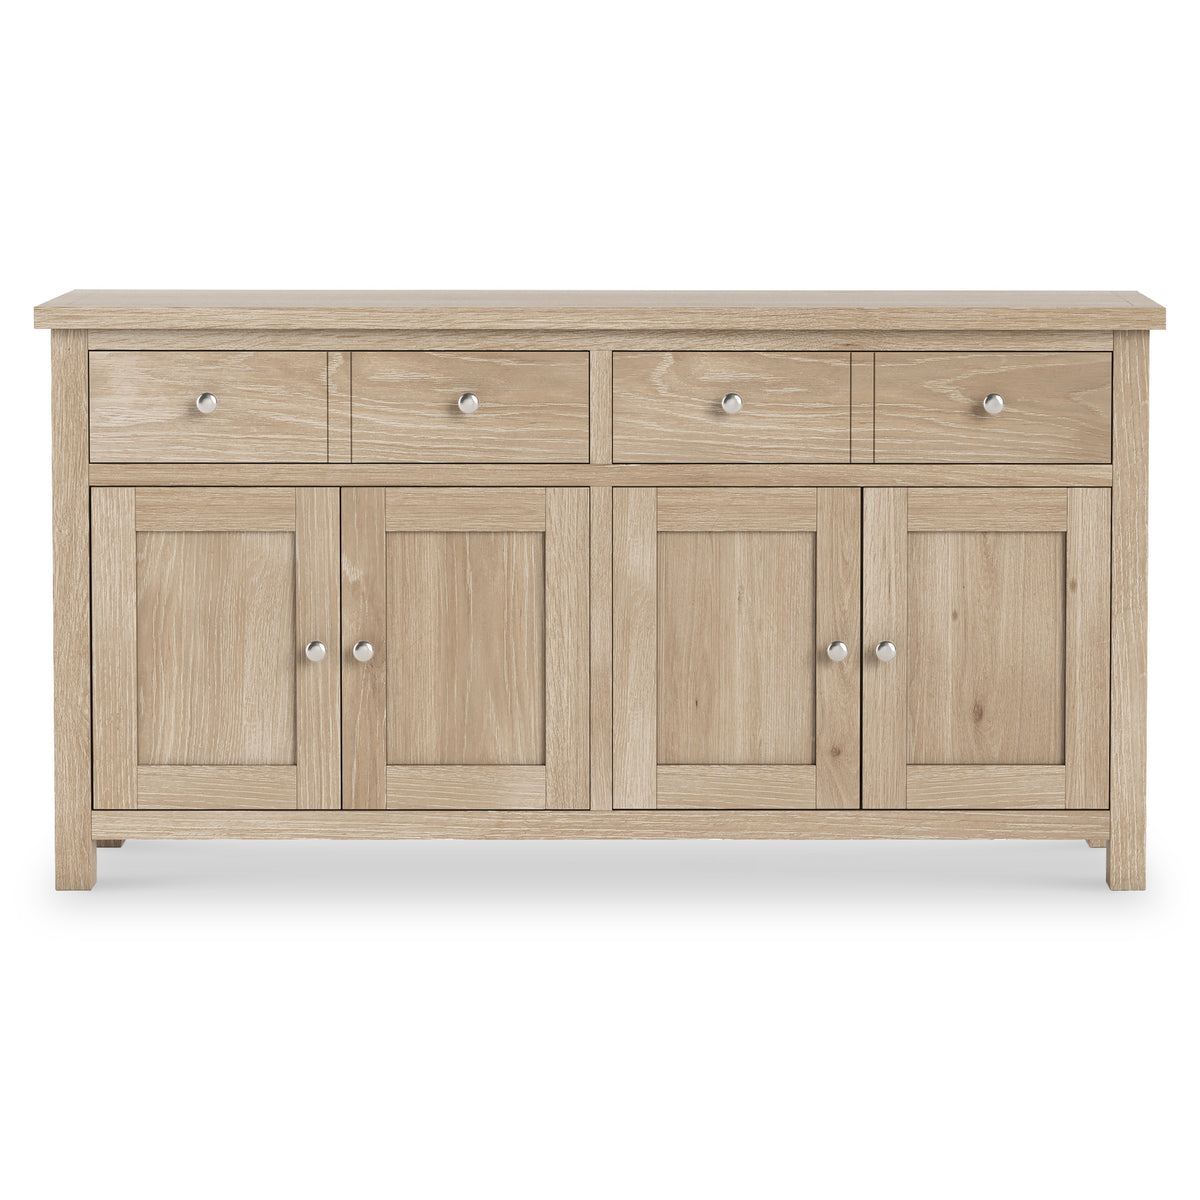 Farrow Oak Extra Large Sideboard for living room